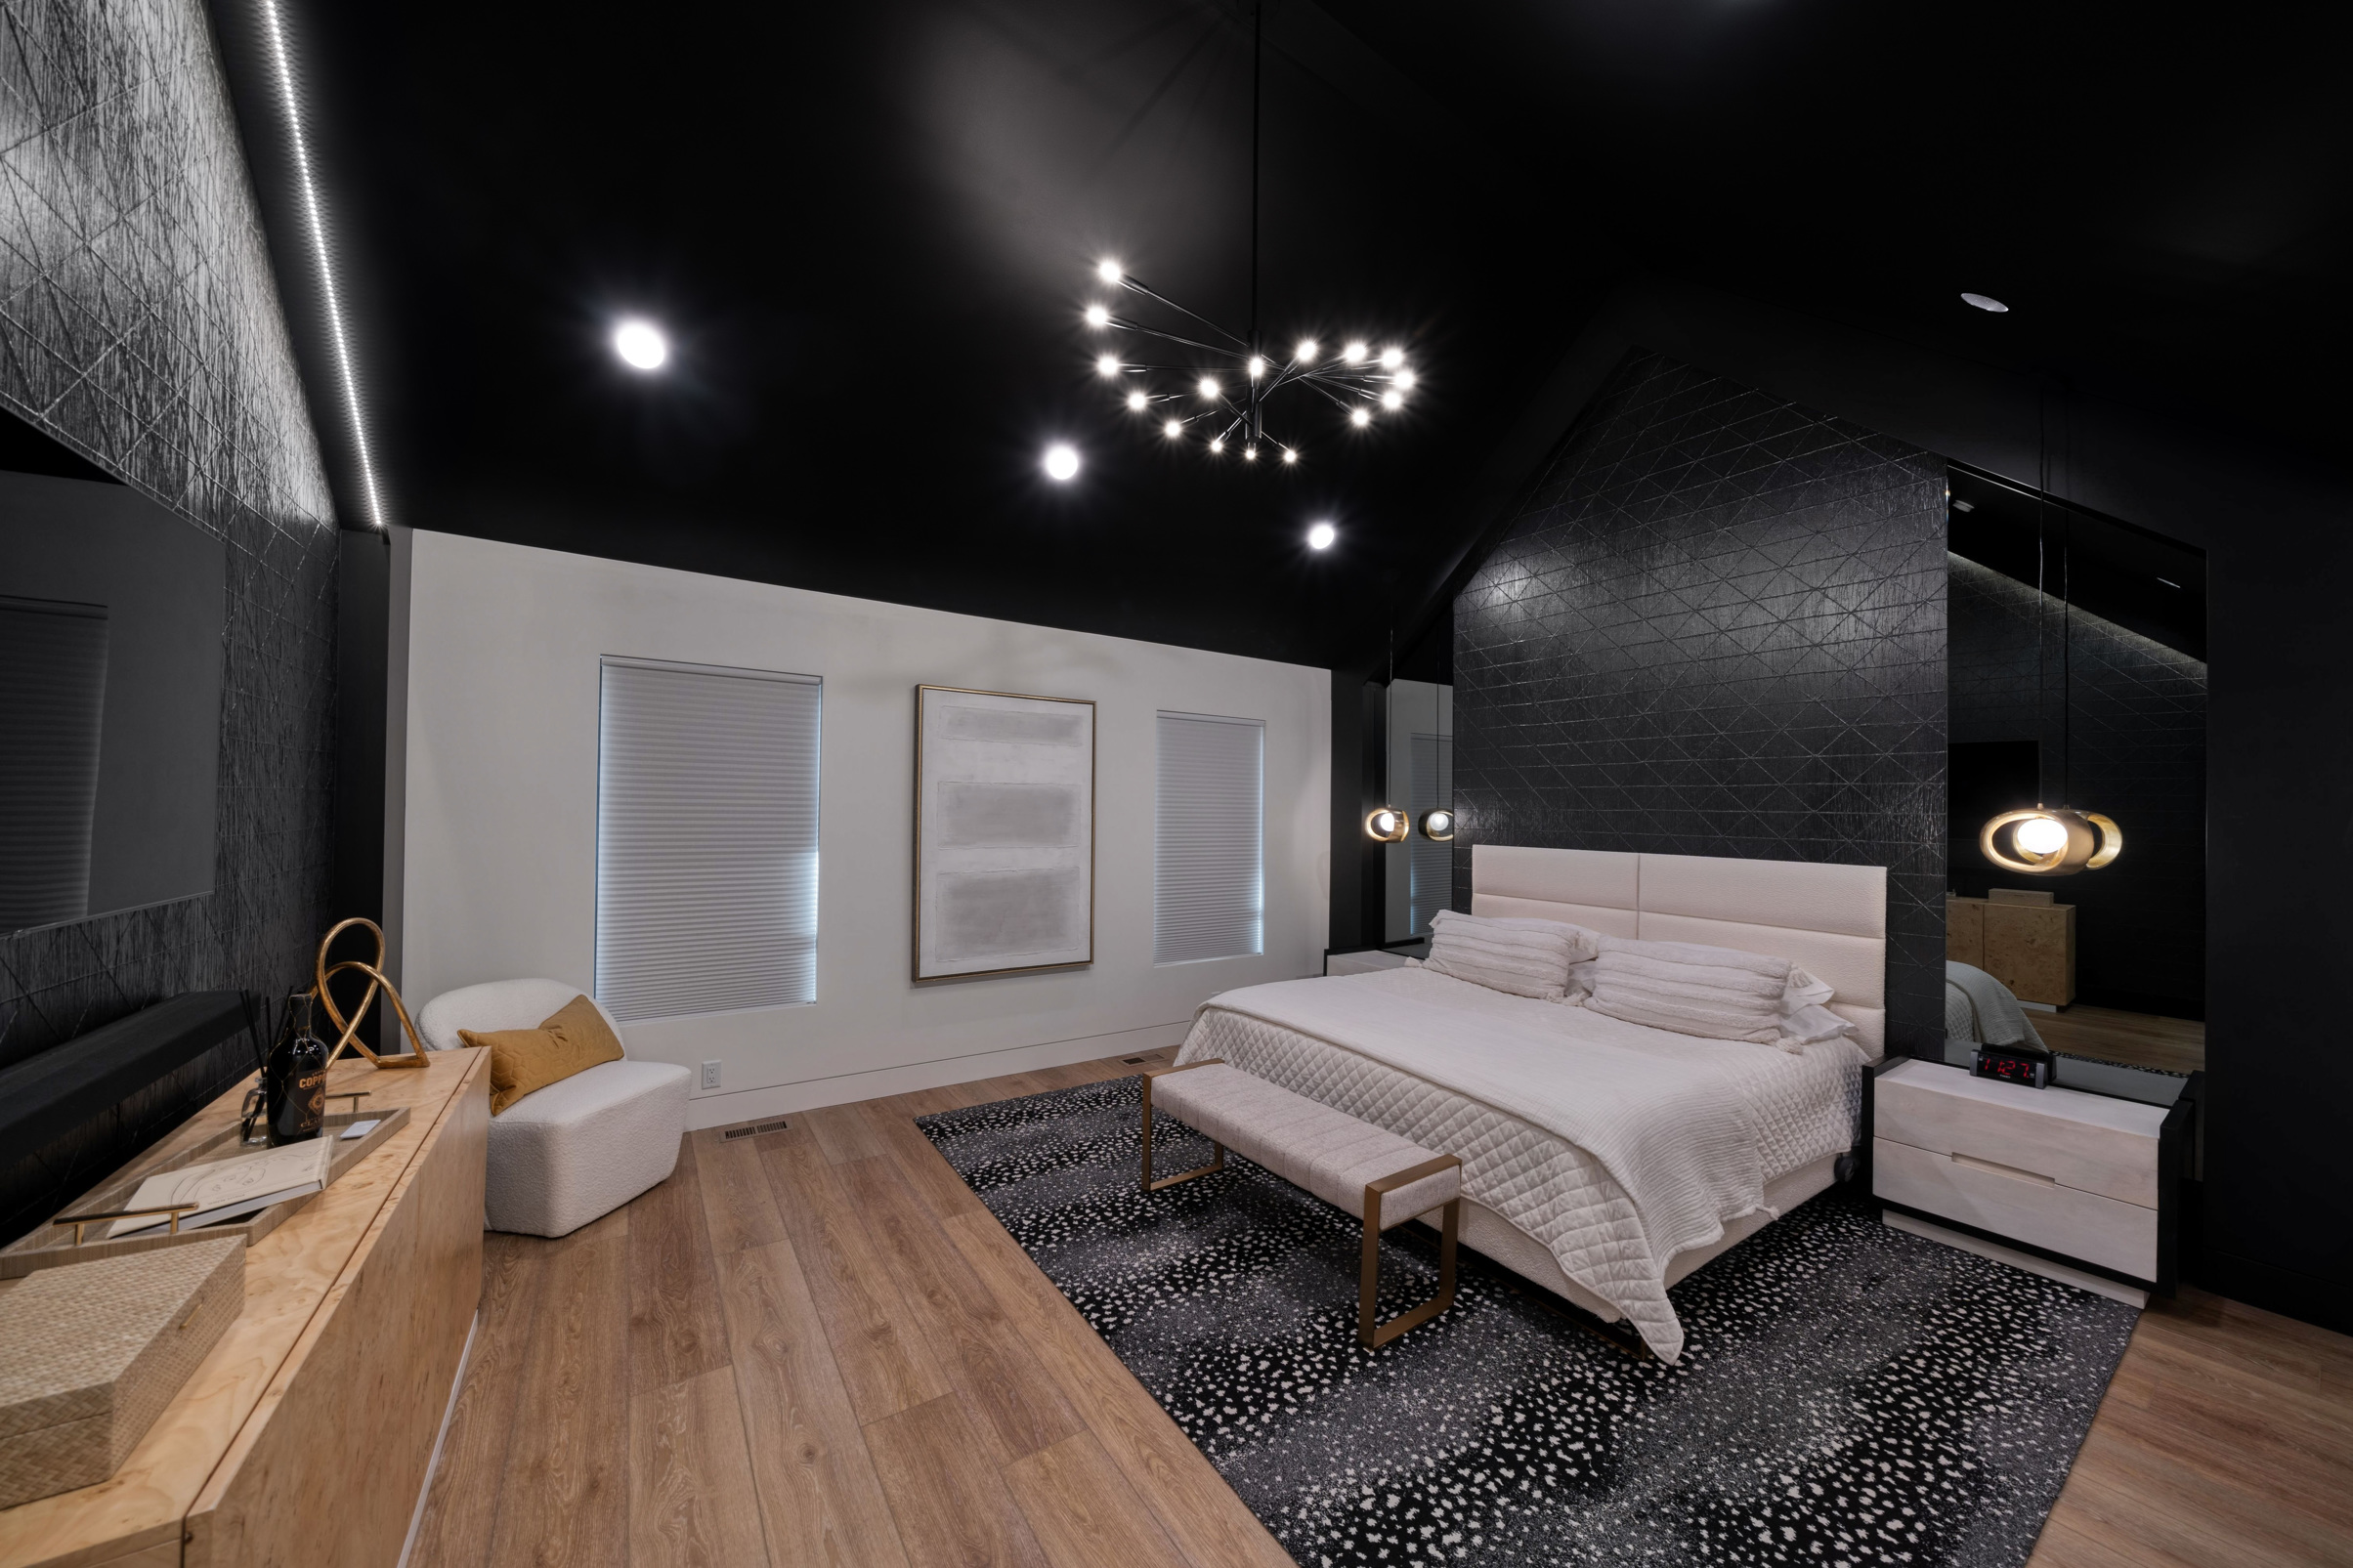 Modern bedroom with wooden floors, modern chandelier, and black walls and ceiling with recessed lighting